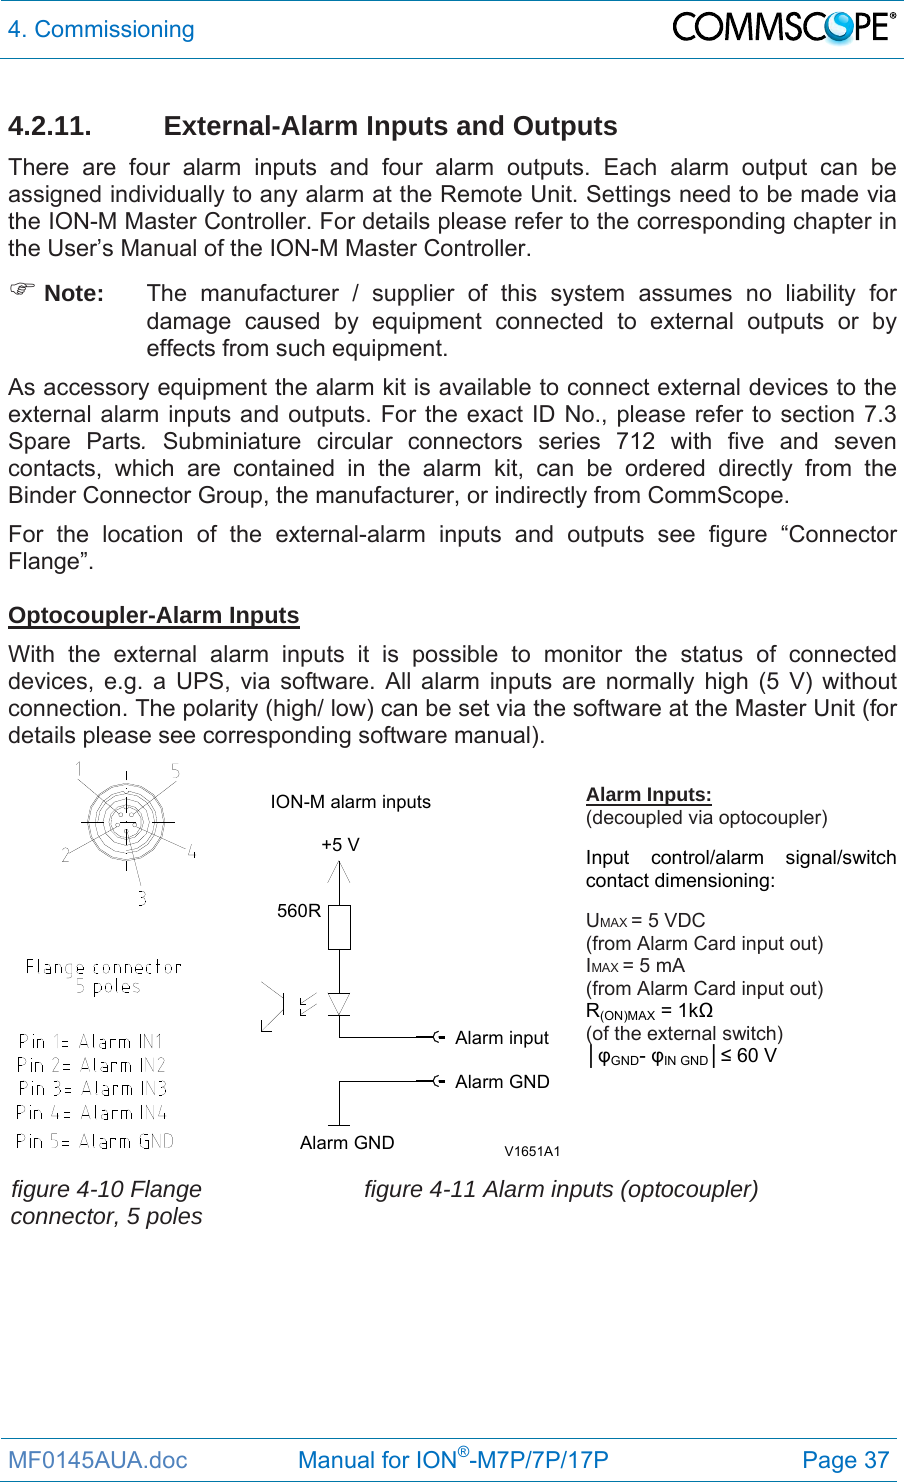 4. Commissioning  MF0145AUA.doc                 Manual for ION®-M7P/7P/17P Page 37 4.2.11. External-Alarm Inputs and Outputs There are four alarm inputs and four alarm outputs. Each alarm output can be assigned individually to any alarm at the Remote Unit. Settings need to be made via the ION-M Master Controller. For details please refer to the corresponding chapter in the User’s Manual of the ION-M Master Controller.   Note:  The manufacturer / supplier of this system assumes no liability for damage caused by equipment connected to external outputs or by effects from such equipment. As accessory equipment the alarm kit is available to connect external devices to the external alarm inputs and outputs. For the exact ID No., please refer to section 7.3 Spare Parts. Subminiature circular connectors series 712 with five and seven contacts, which are contained in the alarm kit, can be ordered directly from the Binder Connector Group, the manufacturer, or indirectly from CommScope.  For the location of the external-alarm inputs and outputs see figure “Connector Flange”.   Optocoupler-Alarm Inputs With the external alarm inputs it is possible to monitor the status of connected devices, e.g. a UPS, via software. All alarm inputs are normally high (5 V) without connection. The polarity (high/ low) can be set via the software at the Master Unit (for details please see corresponding software manual).  V1651A1Alarm GNDAlarm GNDAlarm inputION-M alarm inputs+5 V560RAlarm Inputs: (decoupled via optocoupler)  Input control/alarm signal/switch contact dimensioning:  UMAX = 5 VDC  (from Alarm Card input out) IMAX = 5 mA  (from Alarm Card input out) R(ON)MAX = 1kΩ  (of the external switch) │φGND- φIN GND│≤ 60 V  figure 4-10 Flange connector, 5 poles  figure 4-11 Alarm inputs (optocoupler)  